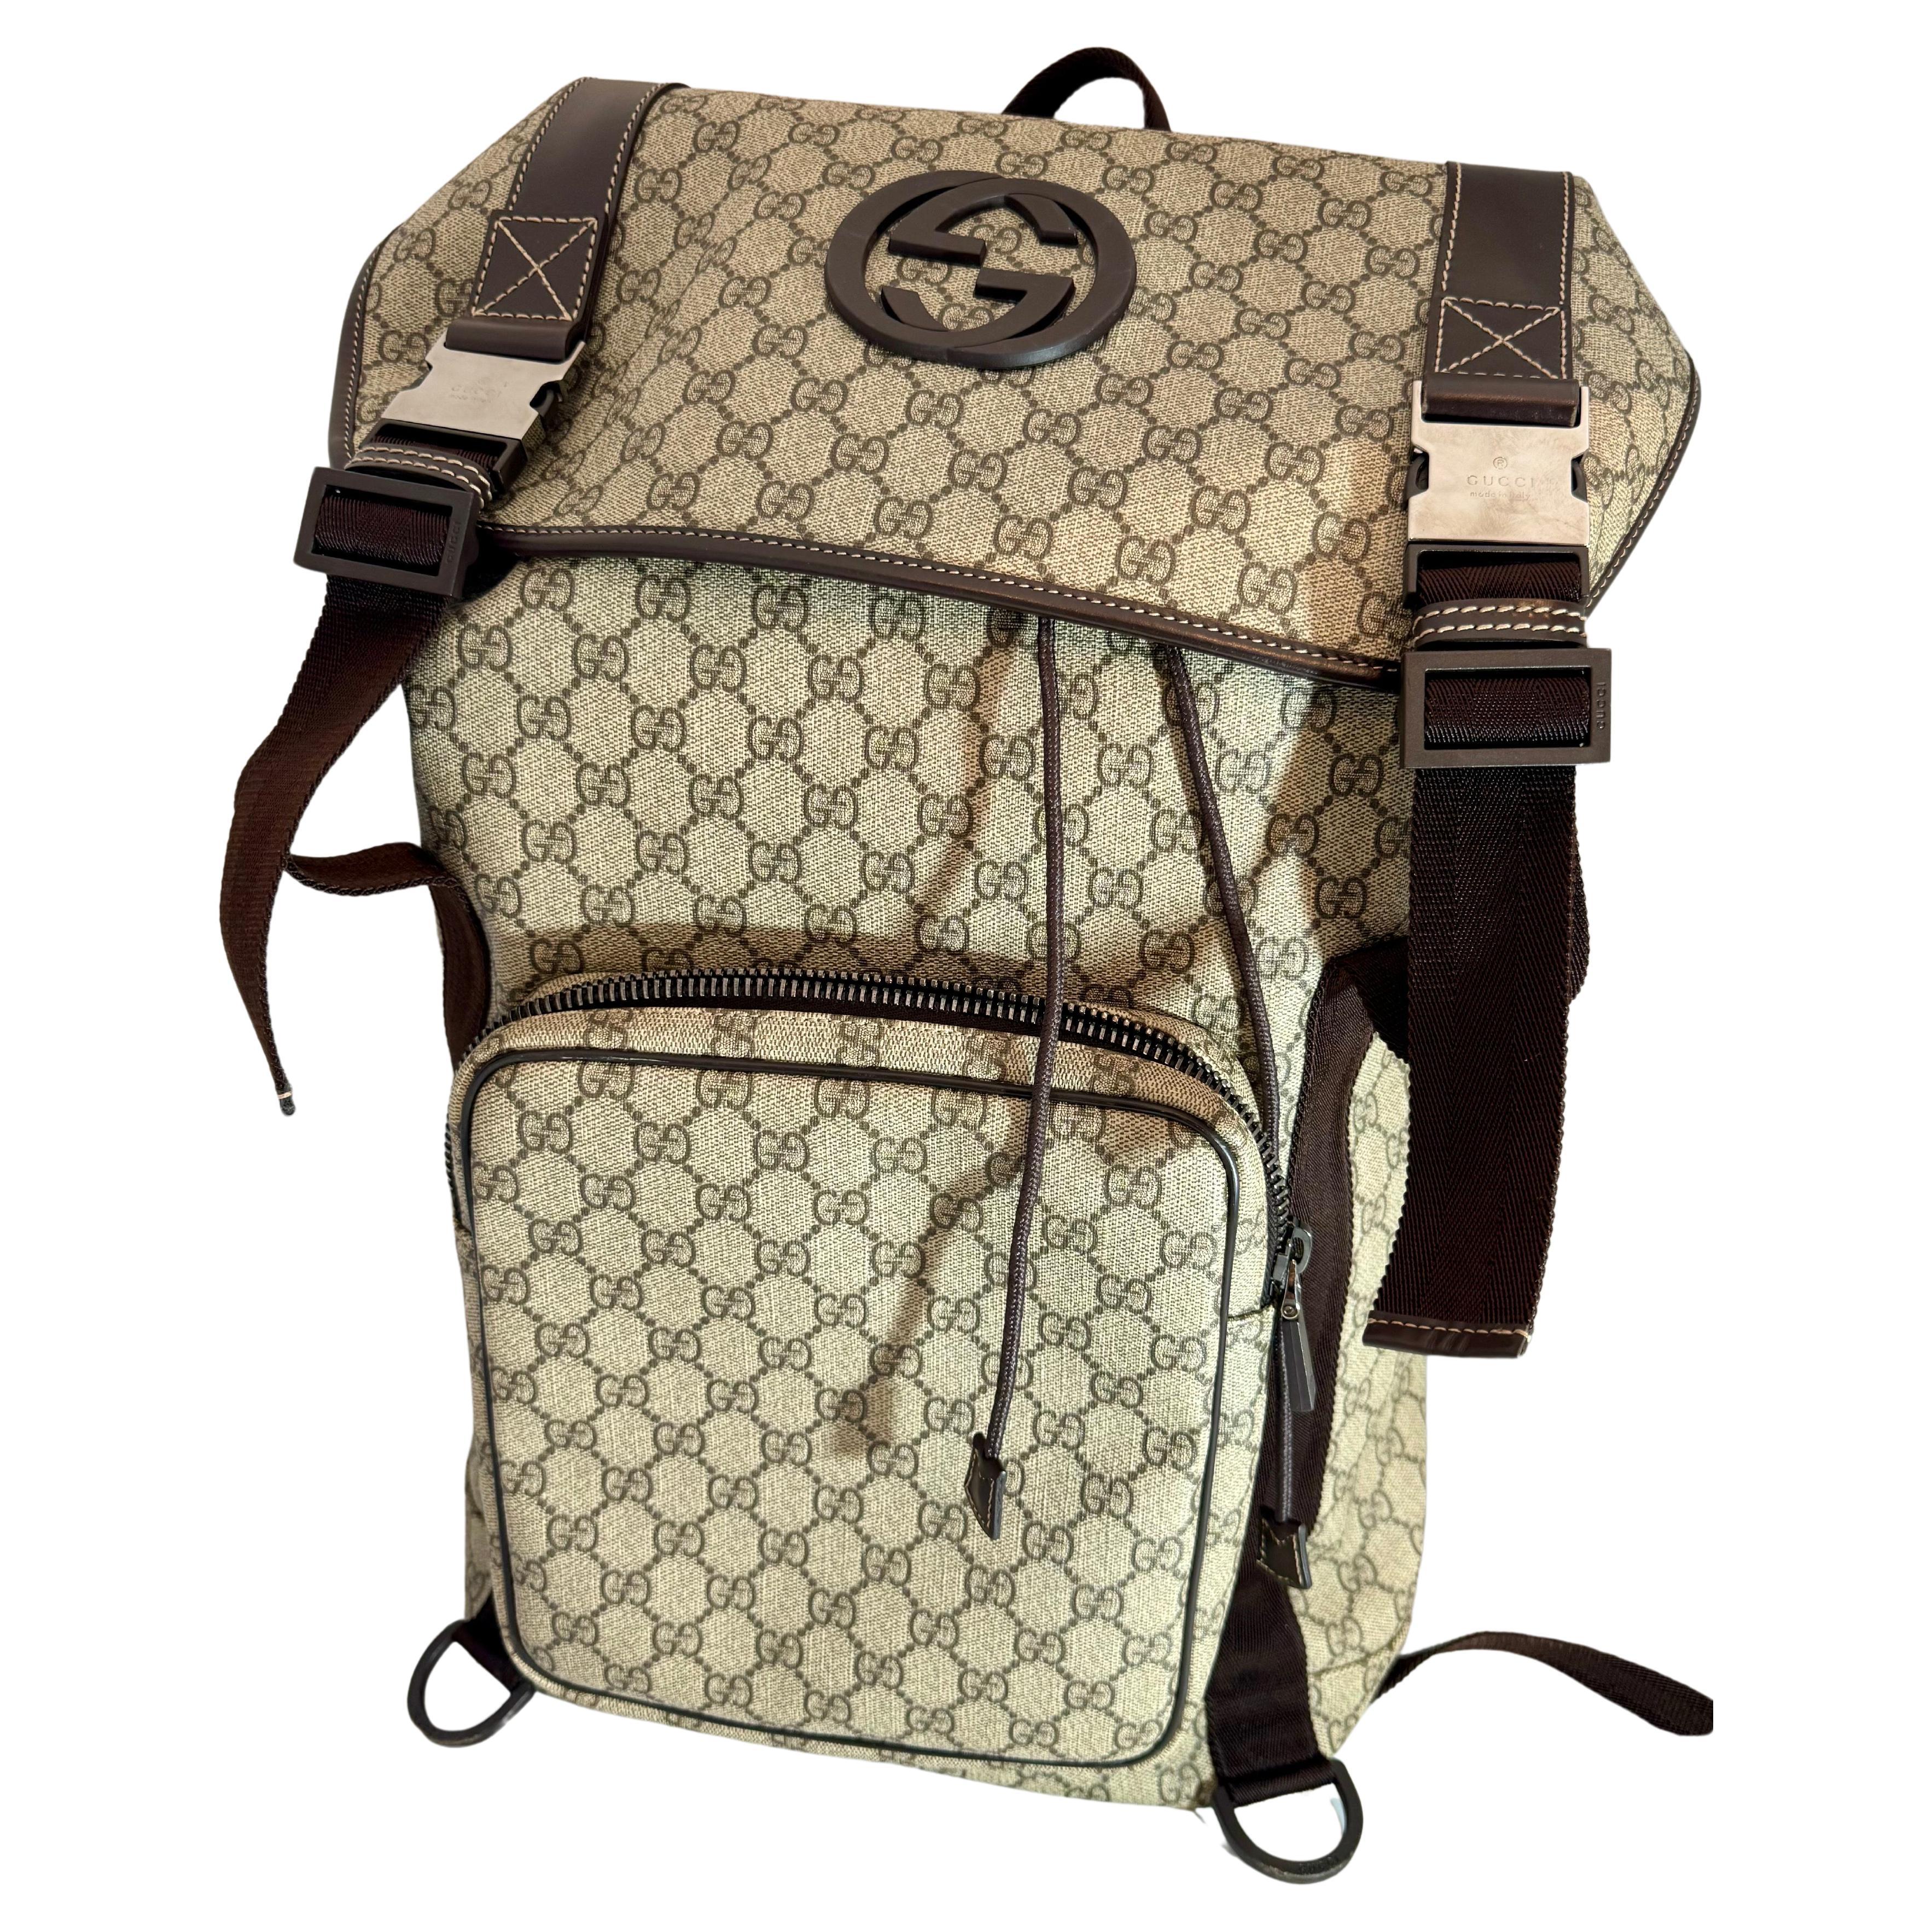 Authentic Gucci Silver GG Coated Canvas Interlocking G Supreme Large Backpack